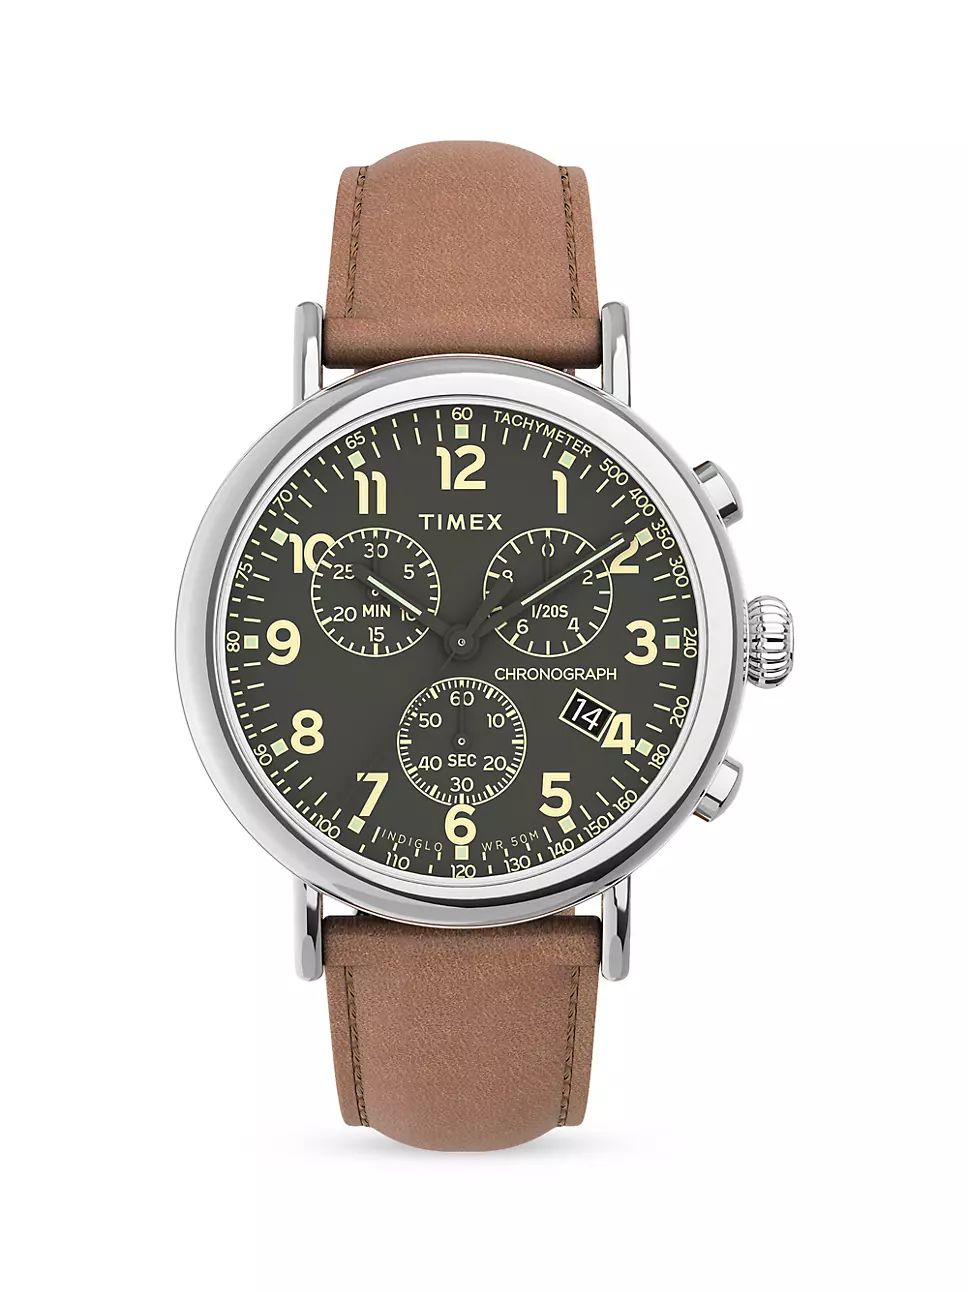 Standard Leather Strap Chronograph Watch | Saks Fifth Avenue